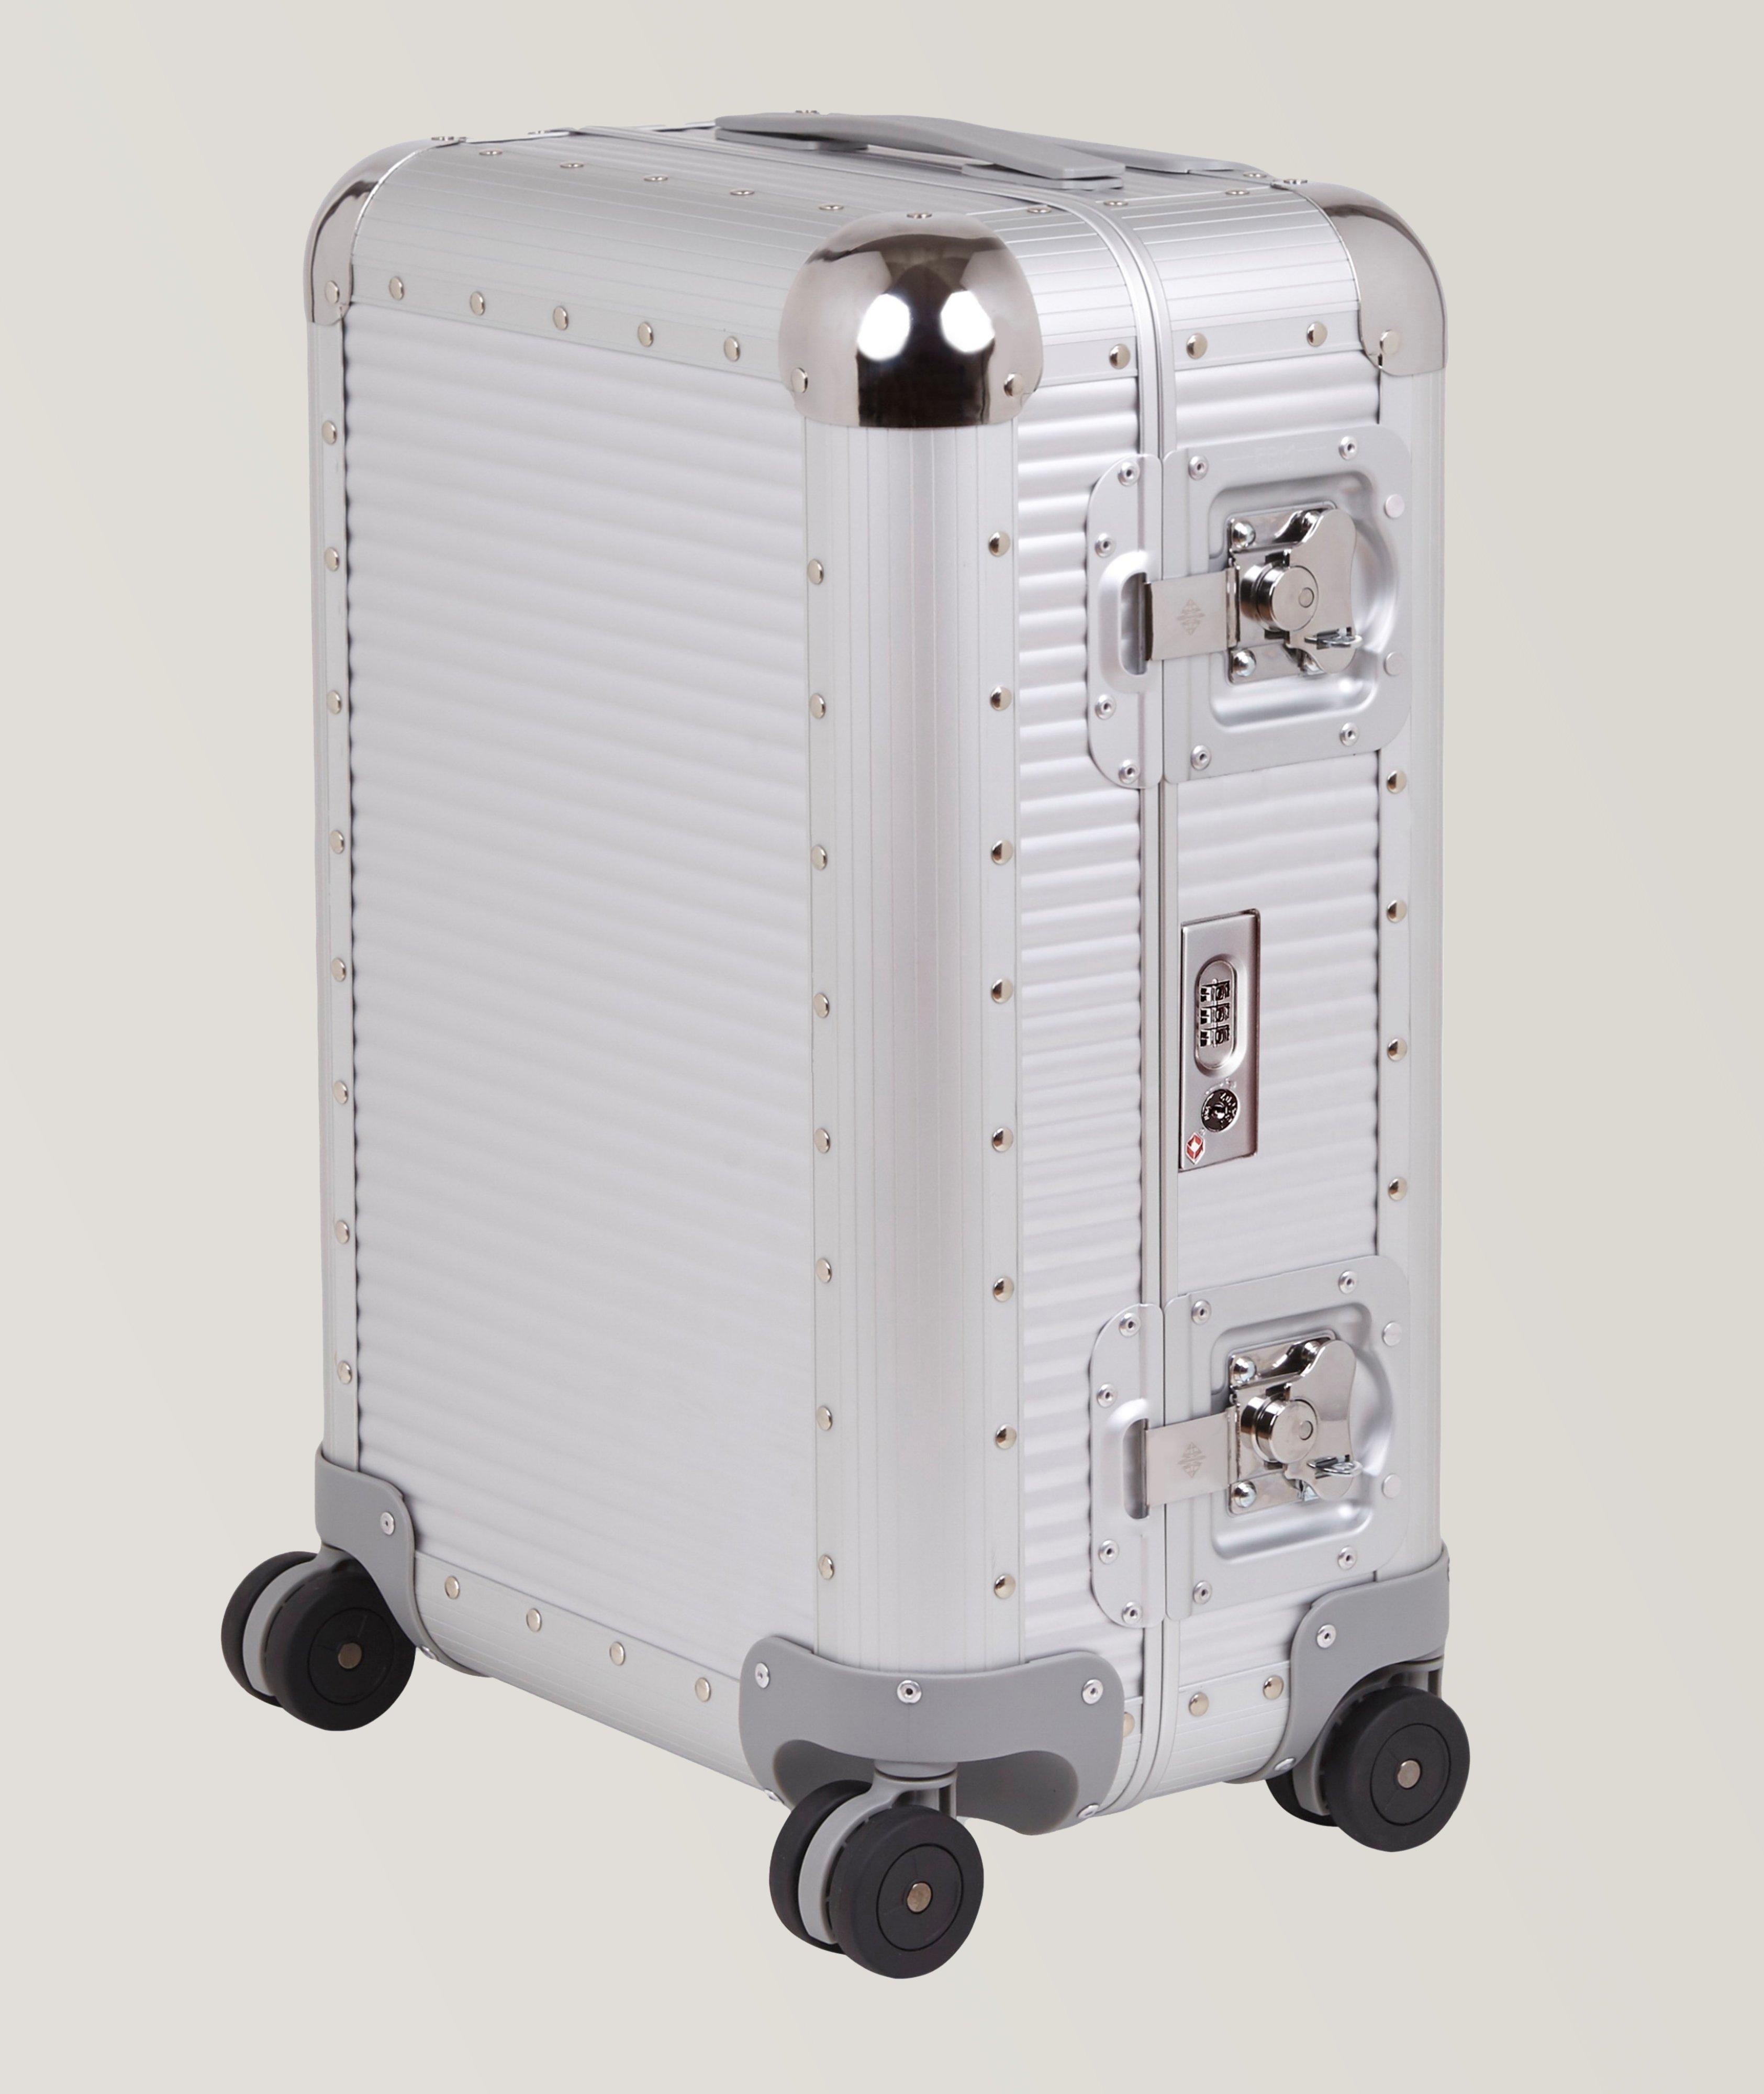 Bank S Spinner 53cm Aluminium Carry-on Luggage image 0